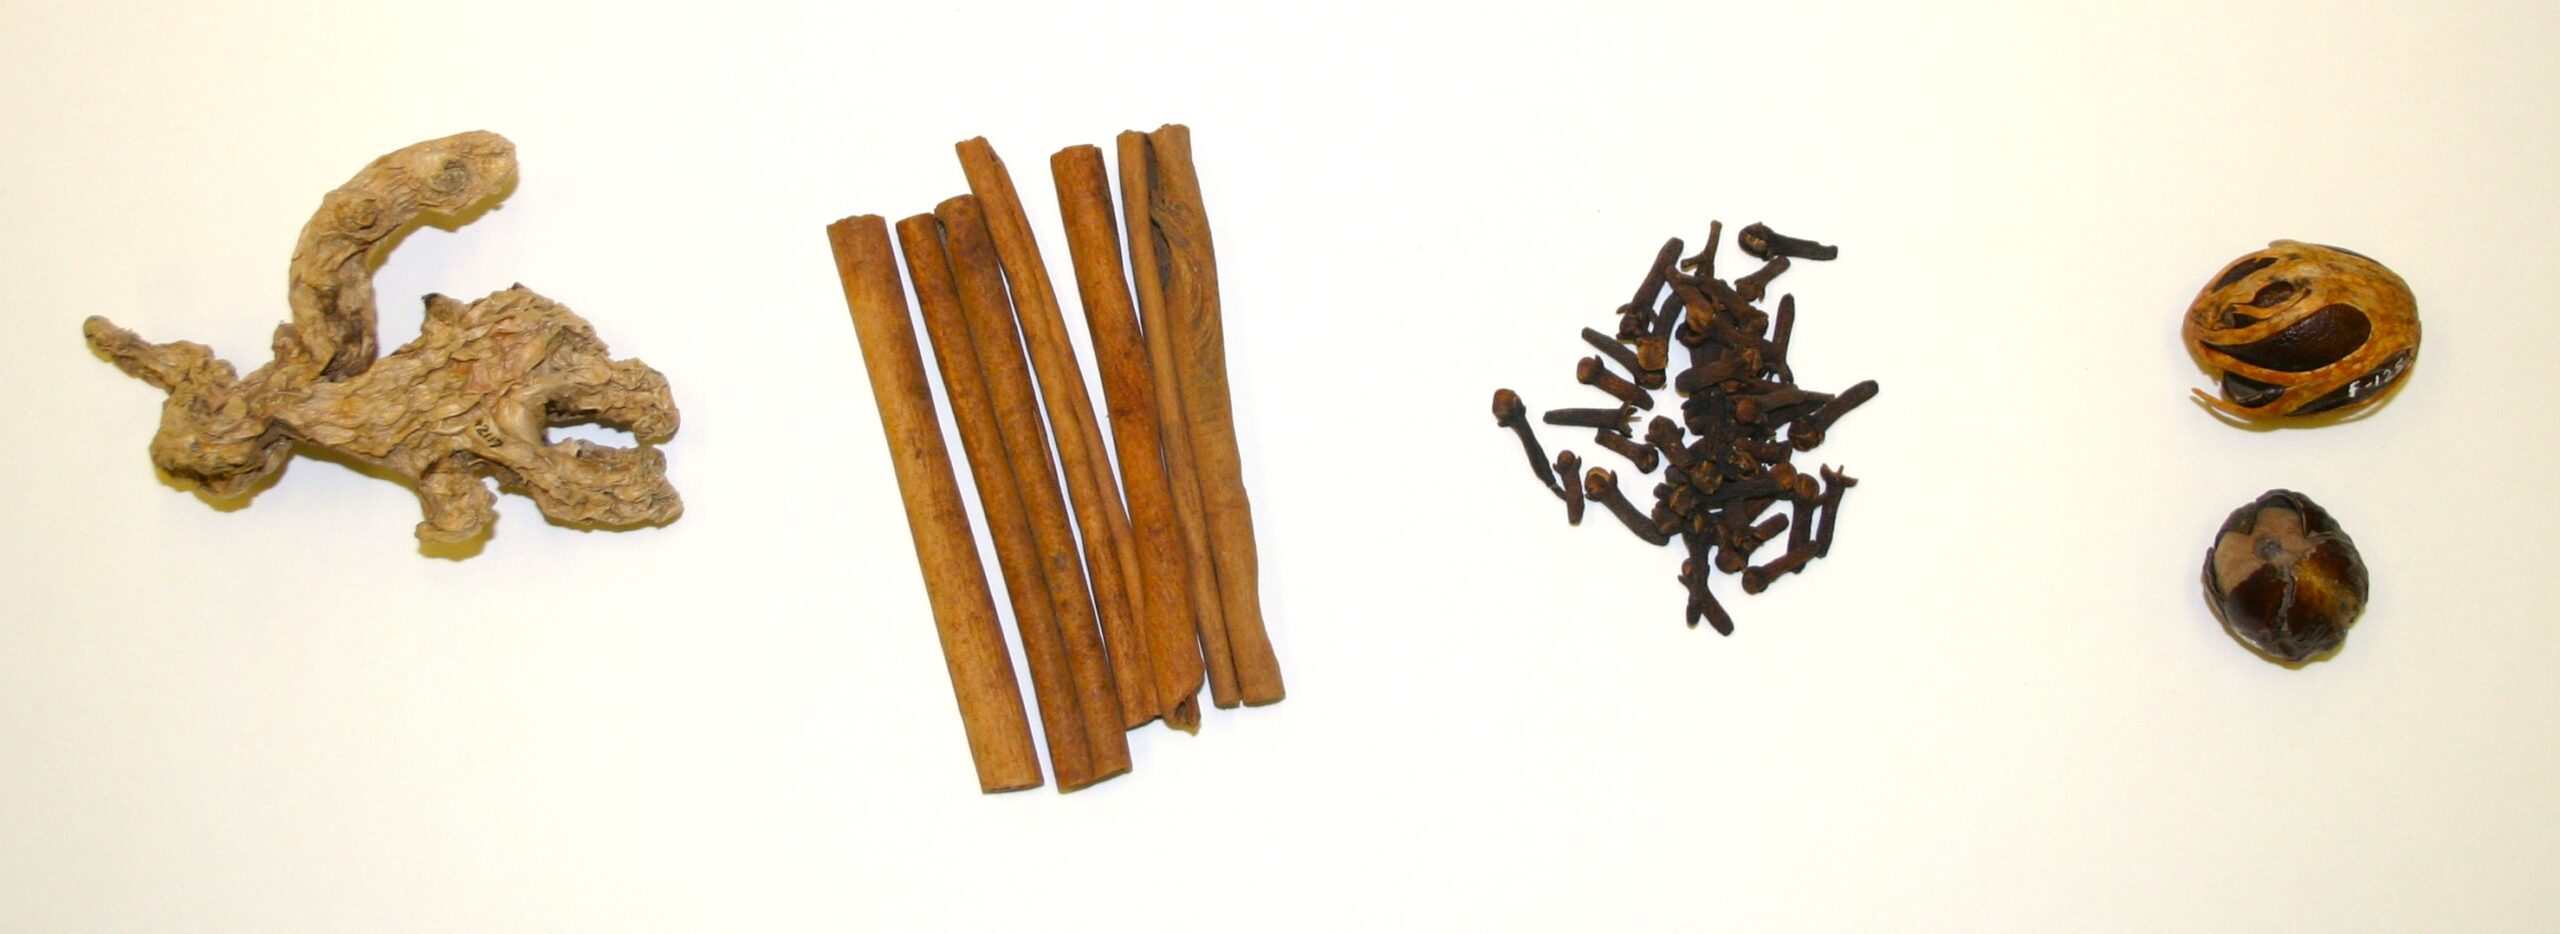 Photograph of four ingredients laid out on a surface. From left to right: ginger, cinnamon, cloves, and nutmeg.